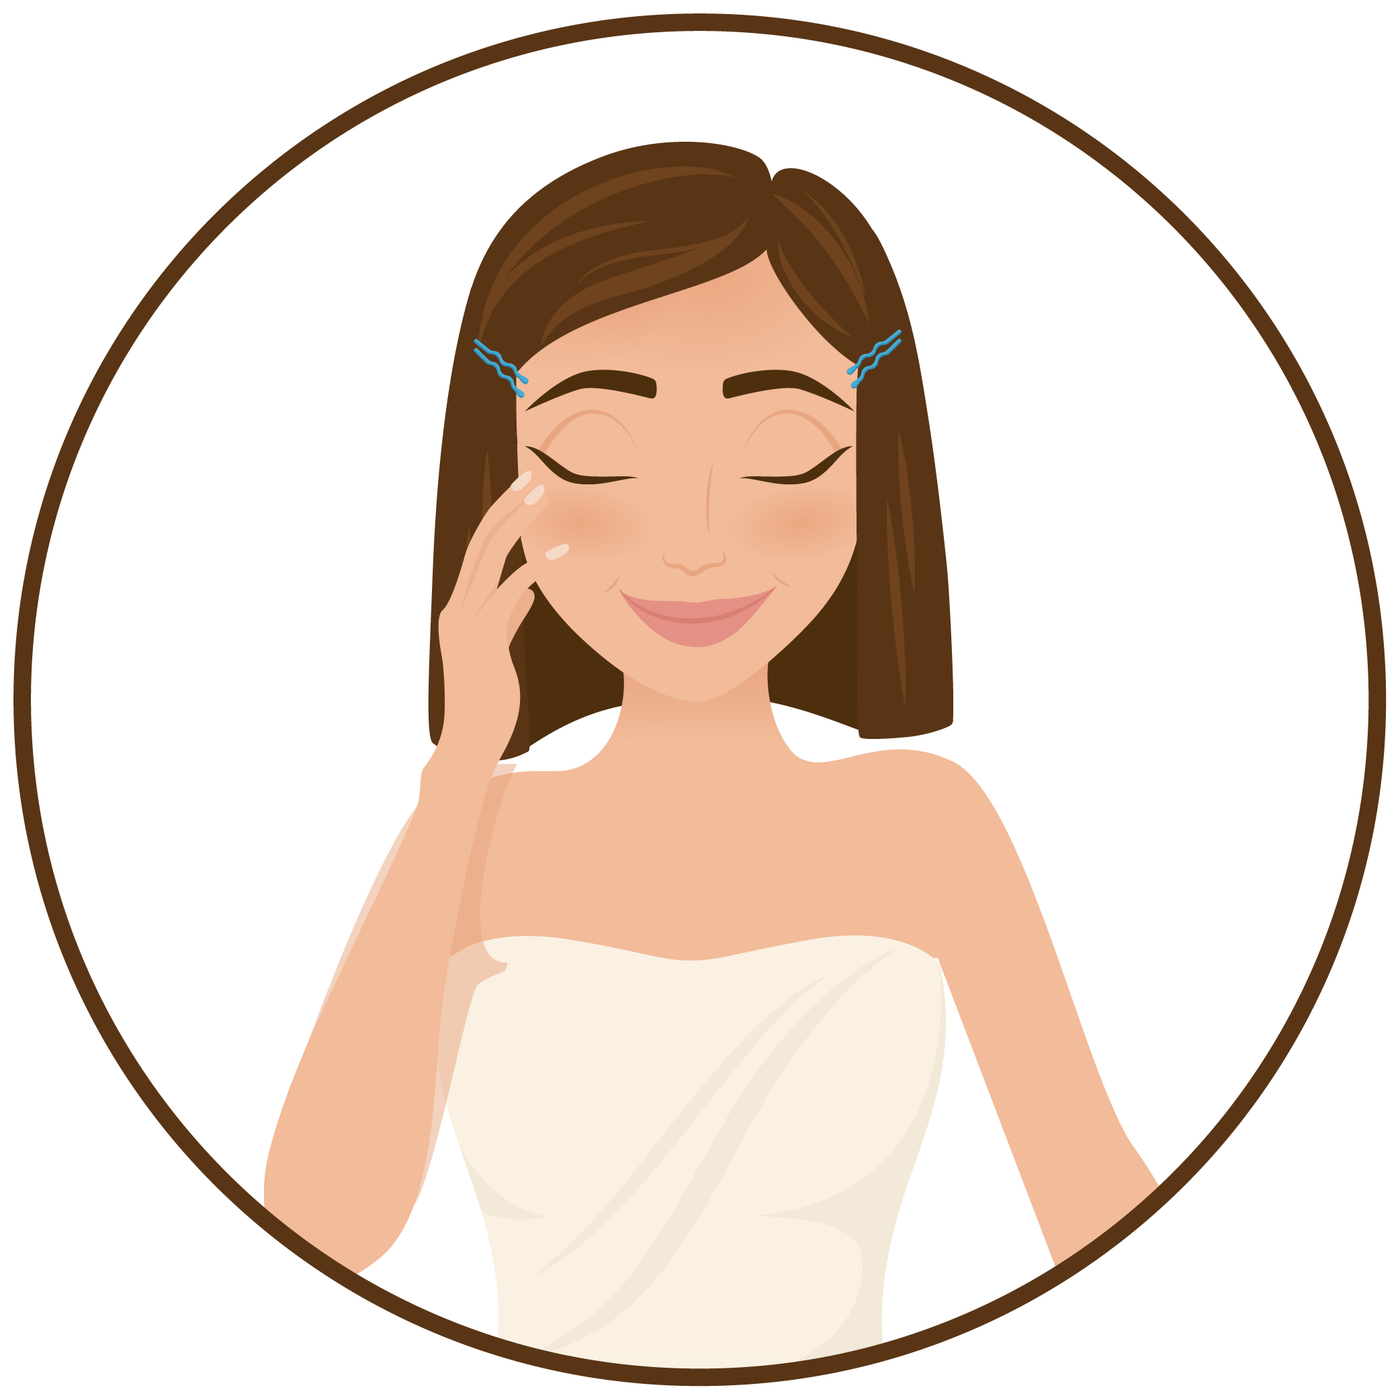 Illustration of smiling woman with brown hair, blue hair clips, and a white dress.